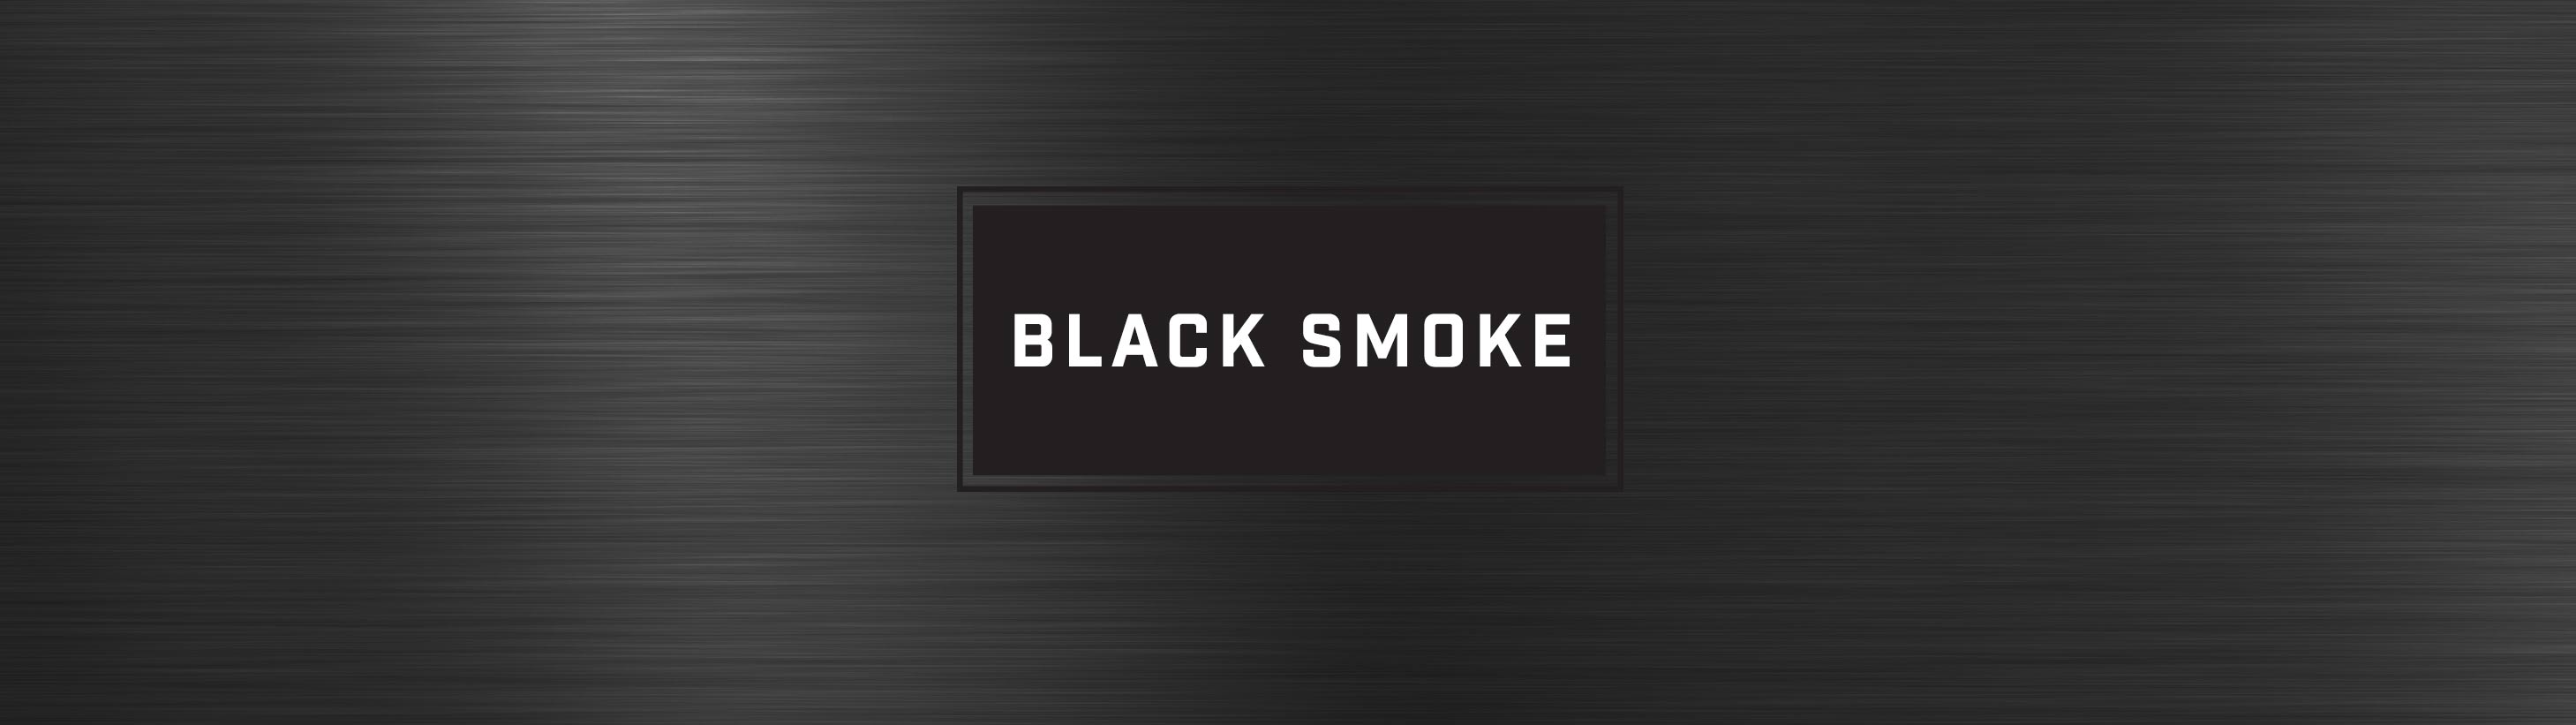 Featured Product: Black Smoke